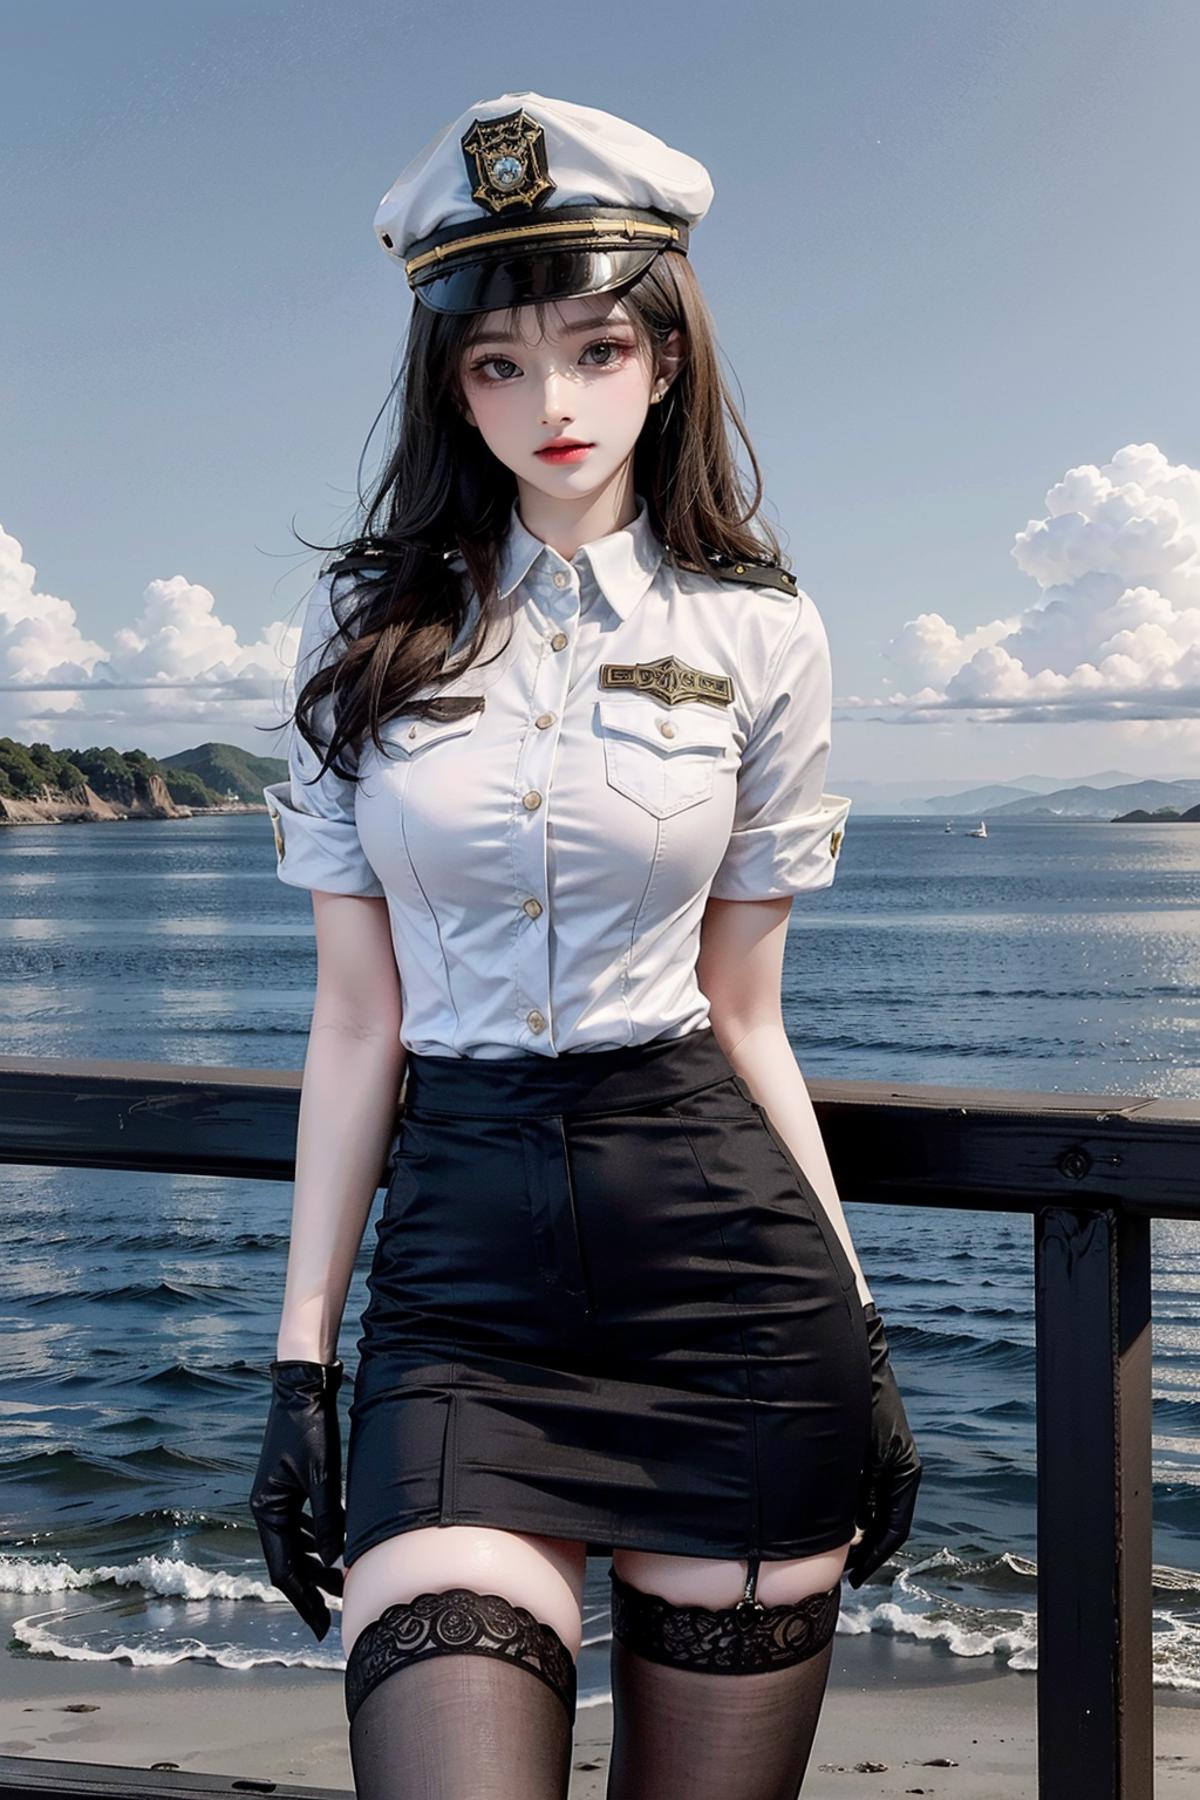 A woman wearing a white shirt and black skirt posing on a pier.